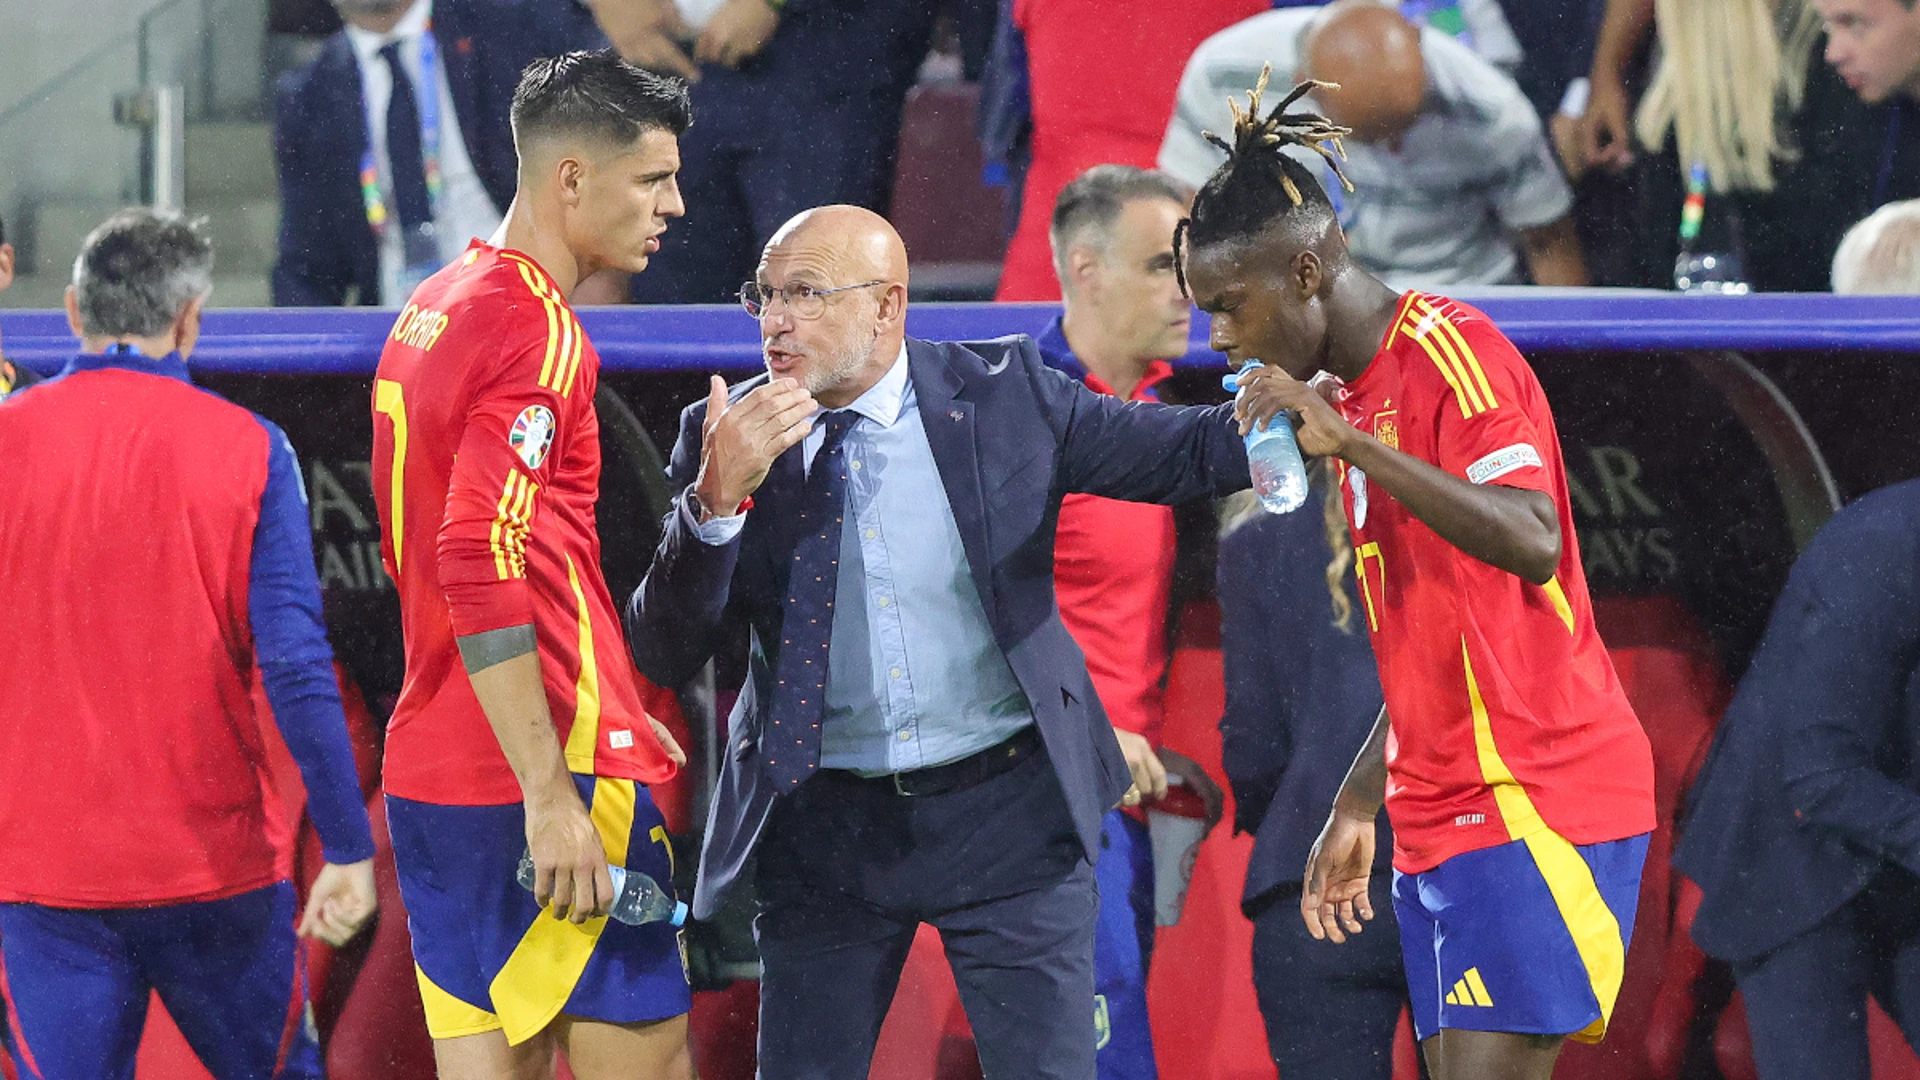 Spain deserved win says coach who now has Germany in his sights